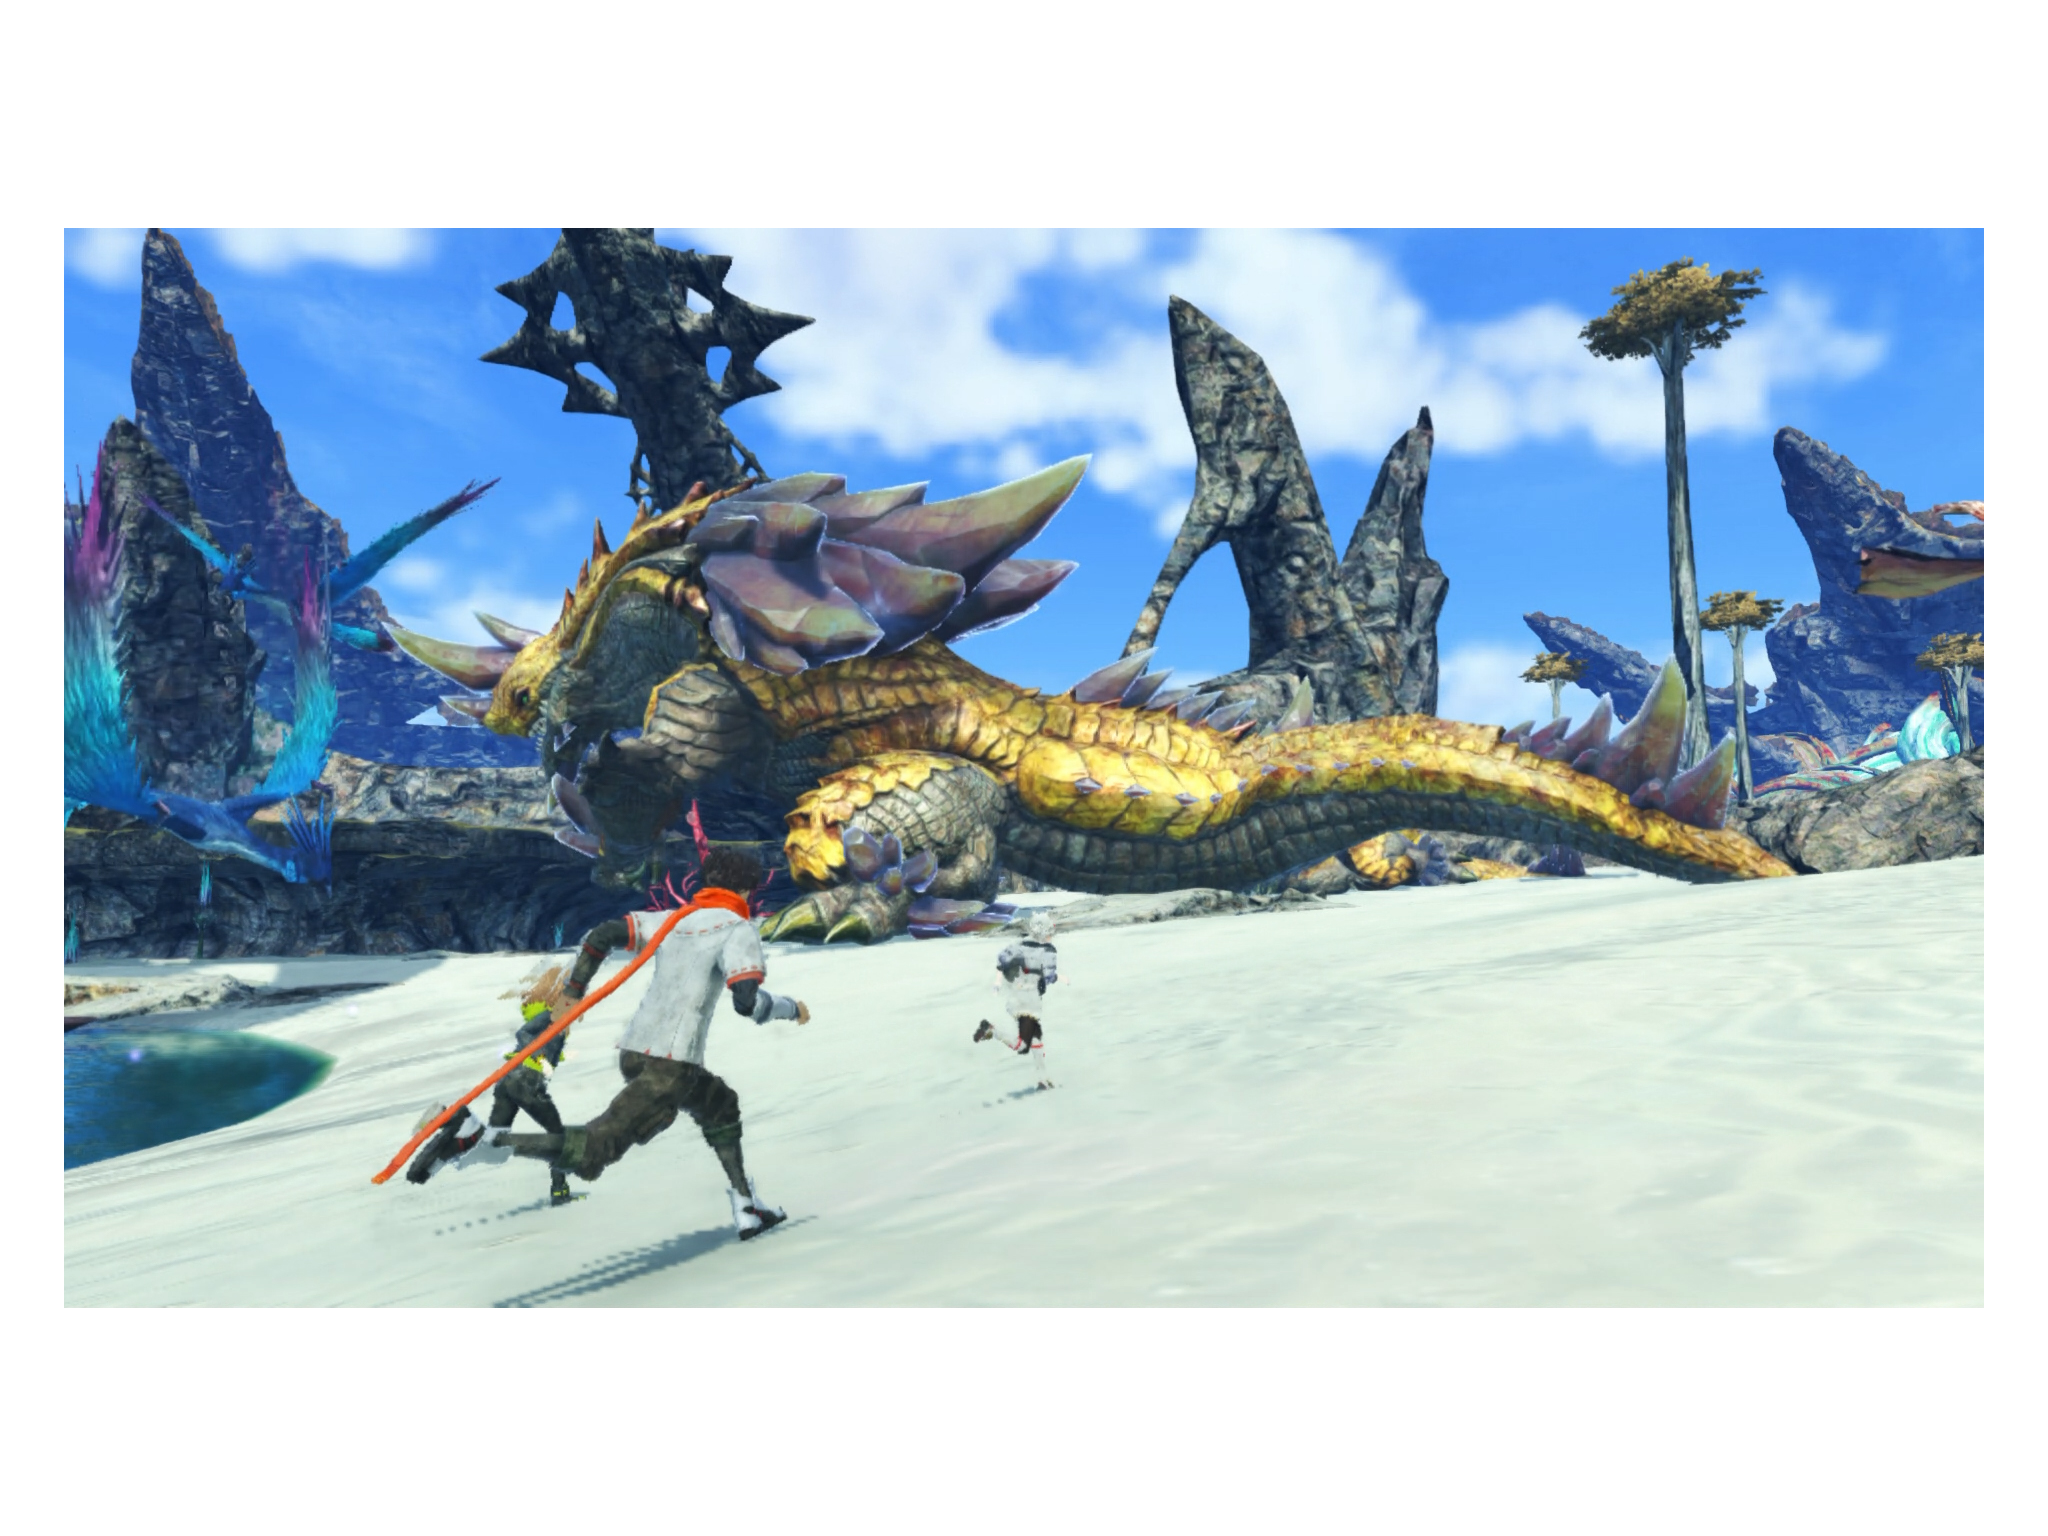 Xenoblade Chronicles 3 review: A meaningful and ambitious role